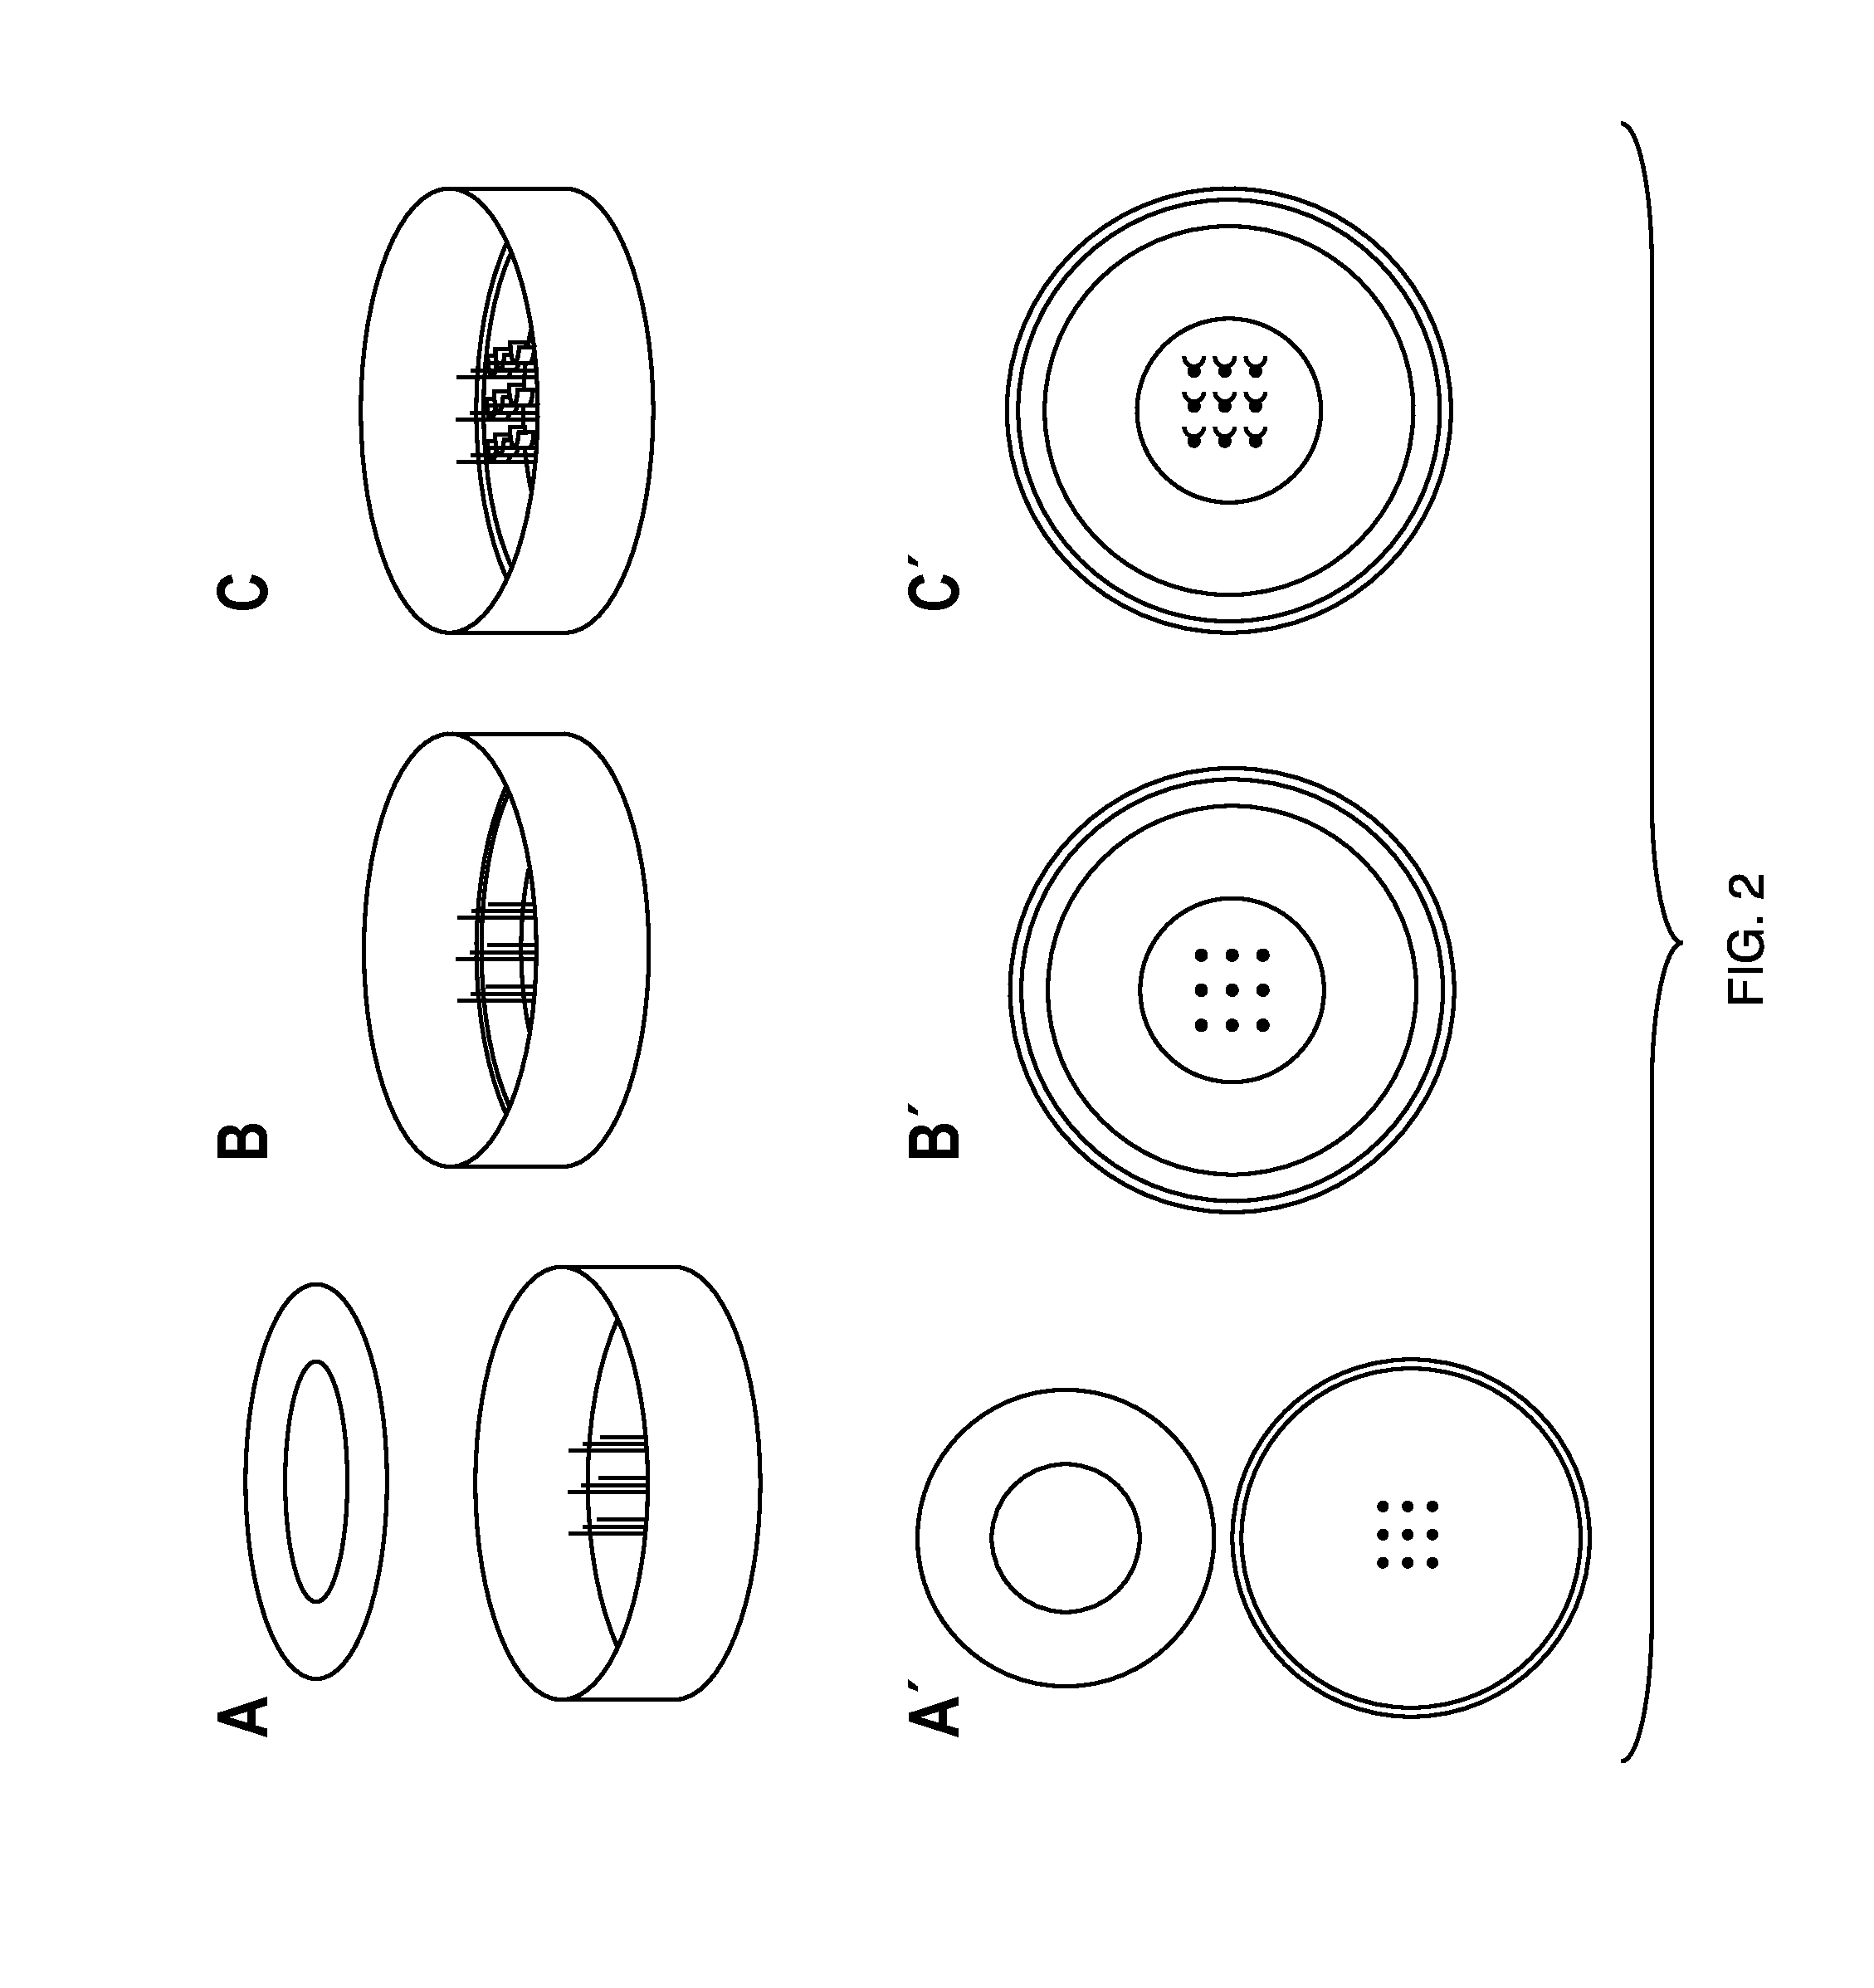 Muscle chips and methods of use thereof